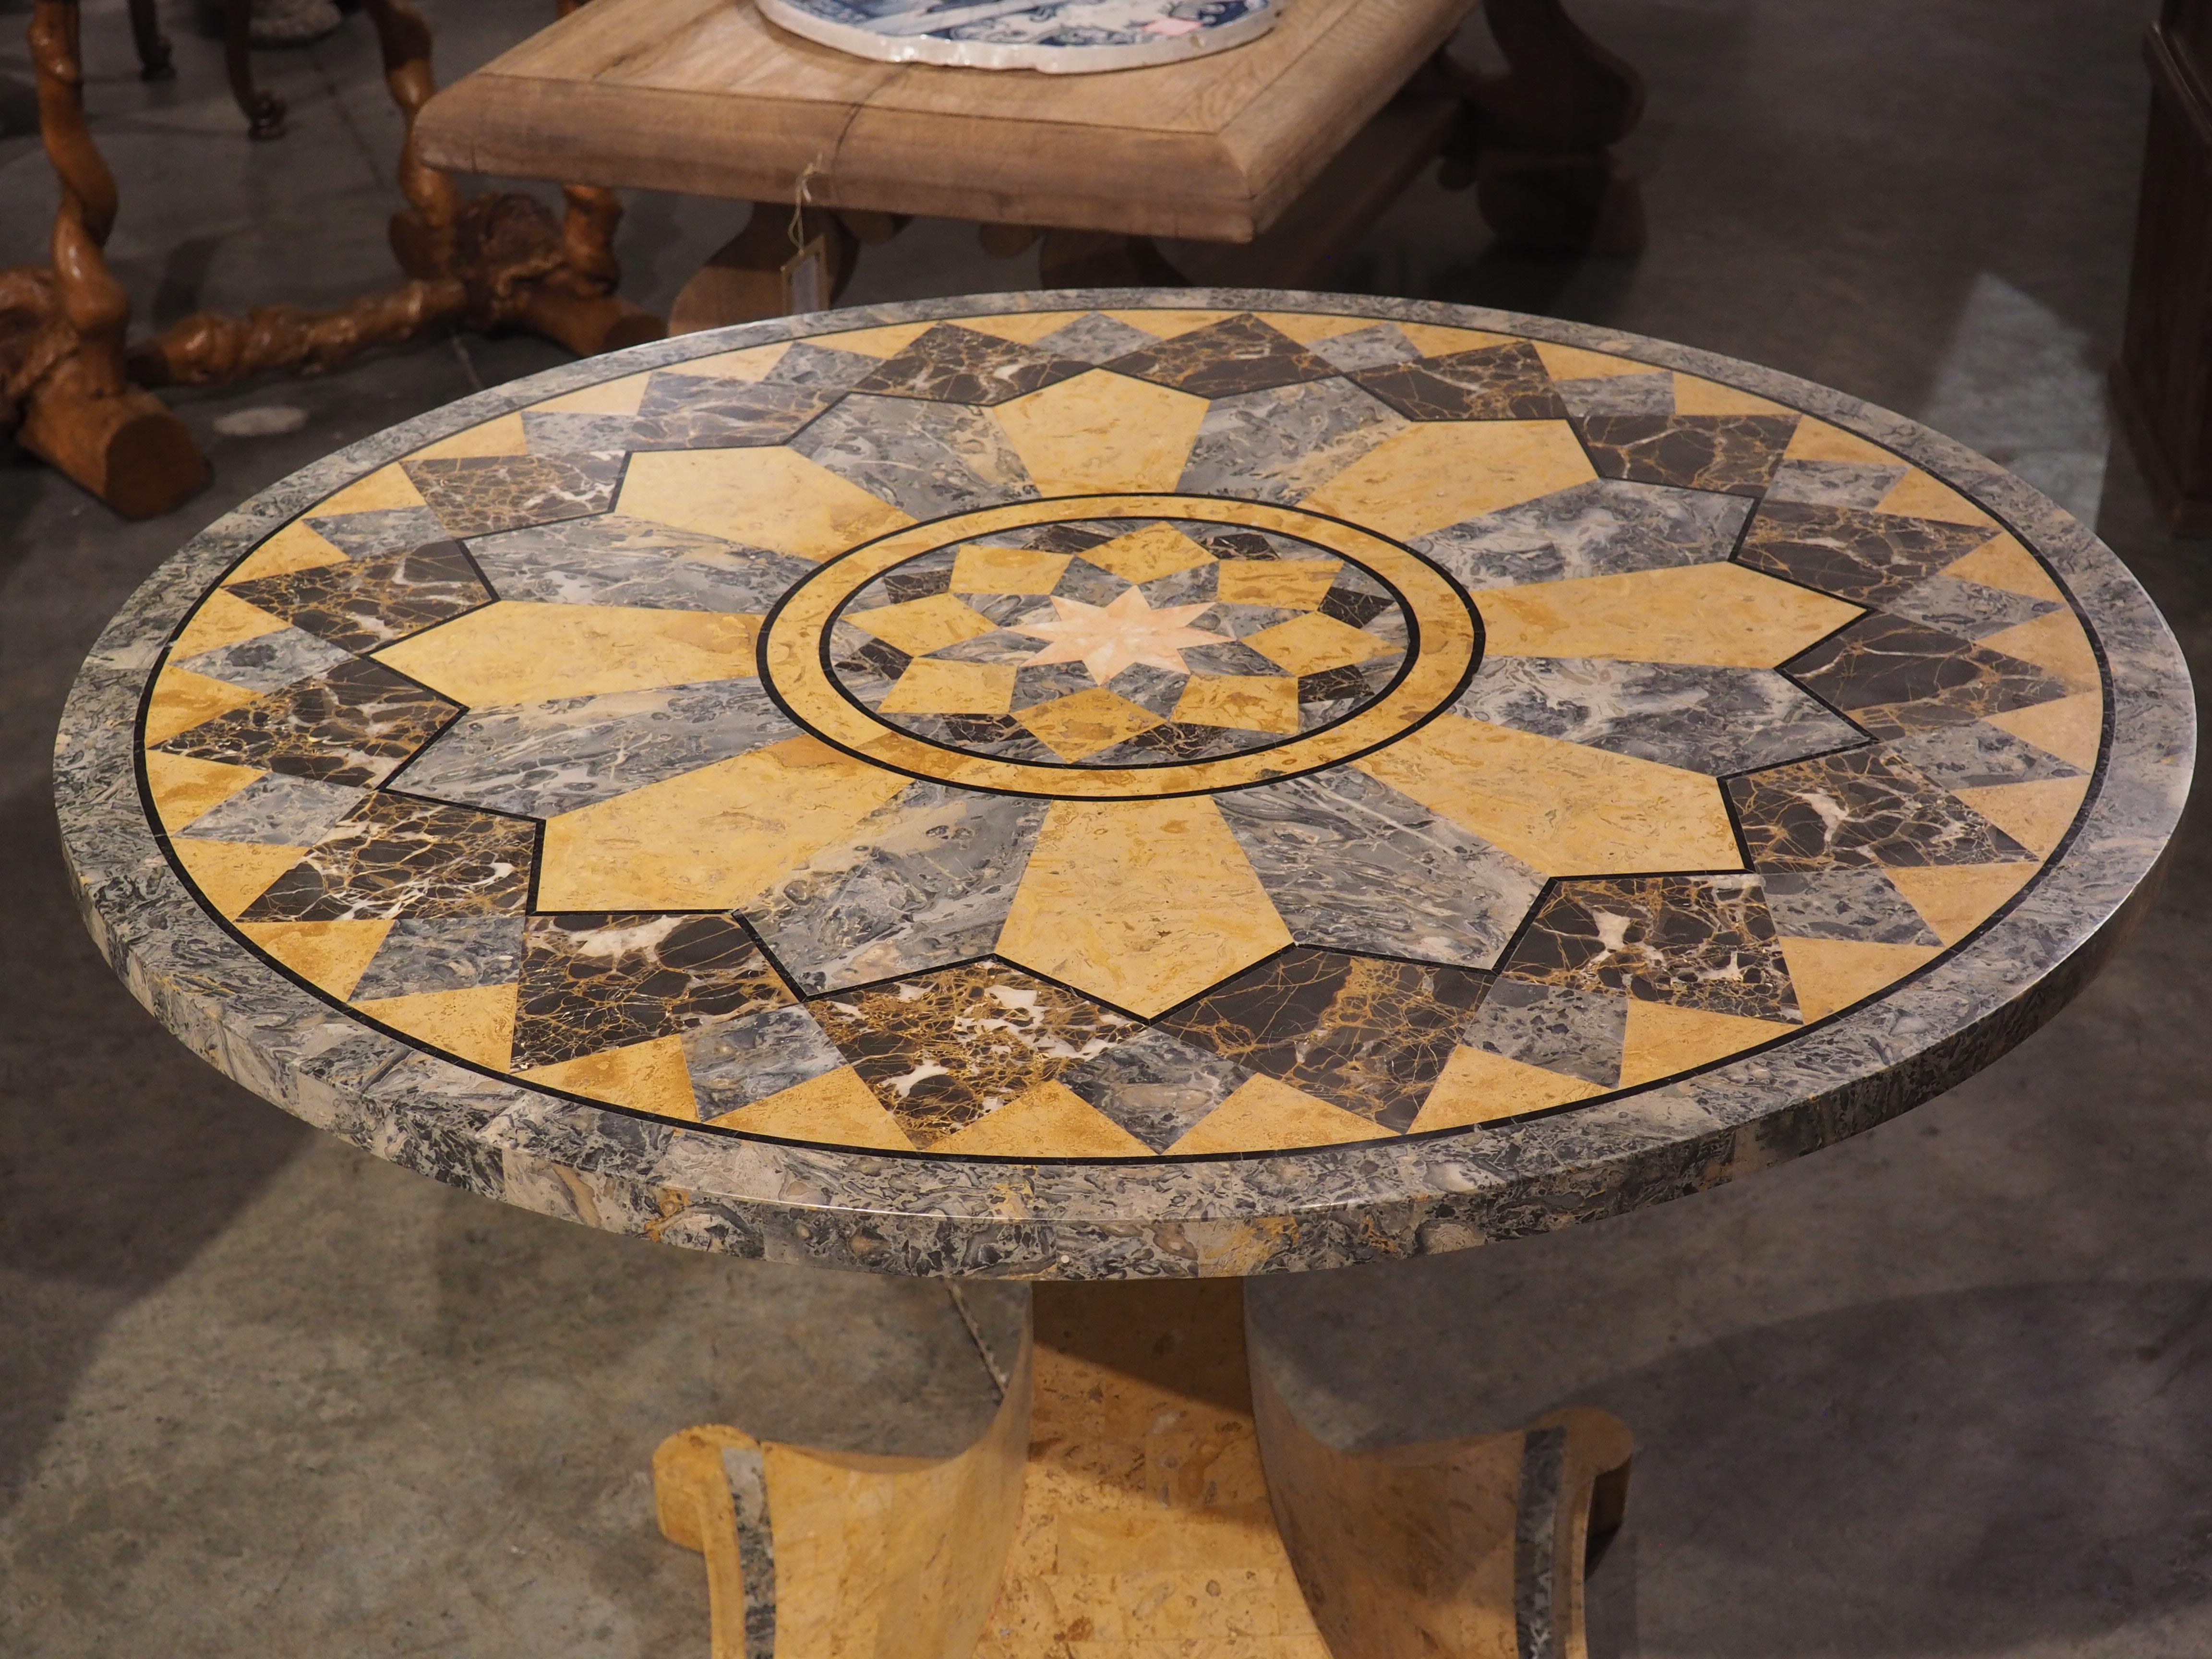 This 20th century center table from Italy features an impressive and beautiful matrix of inlaid marble specimen. Inlay is a decorative technique where colorful materials are placed into carved depressions on a base object. In this case, the base